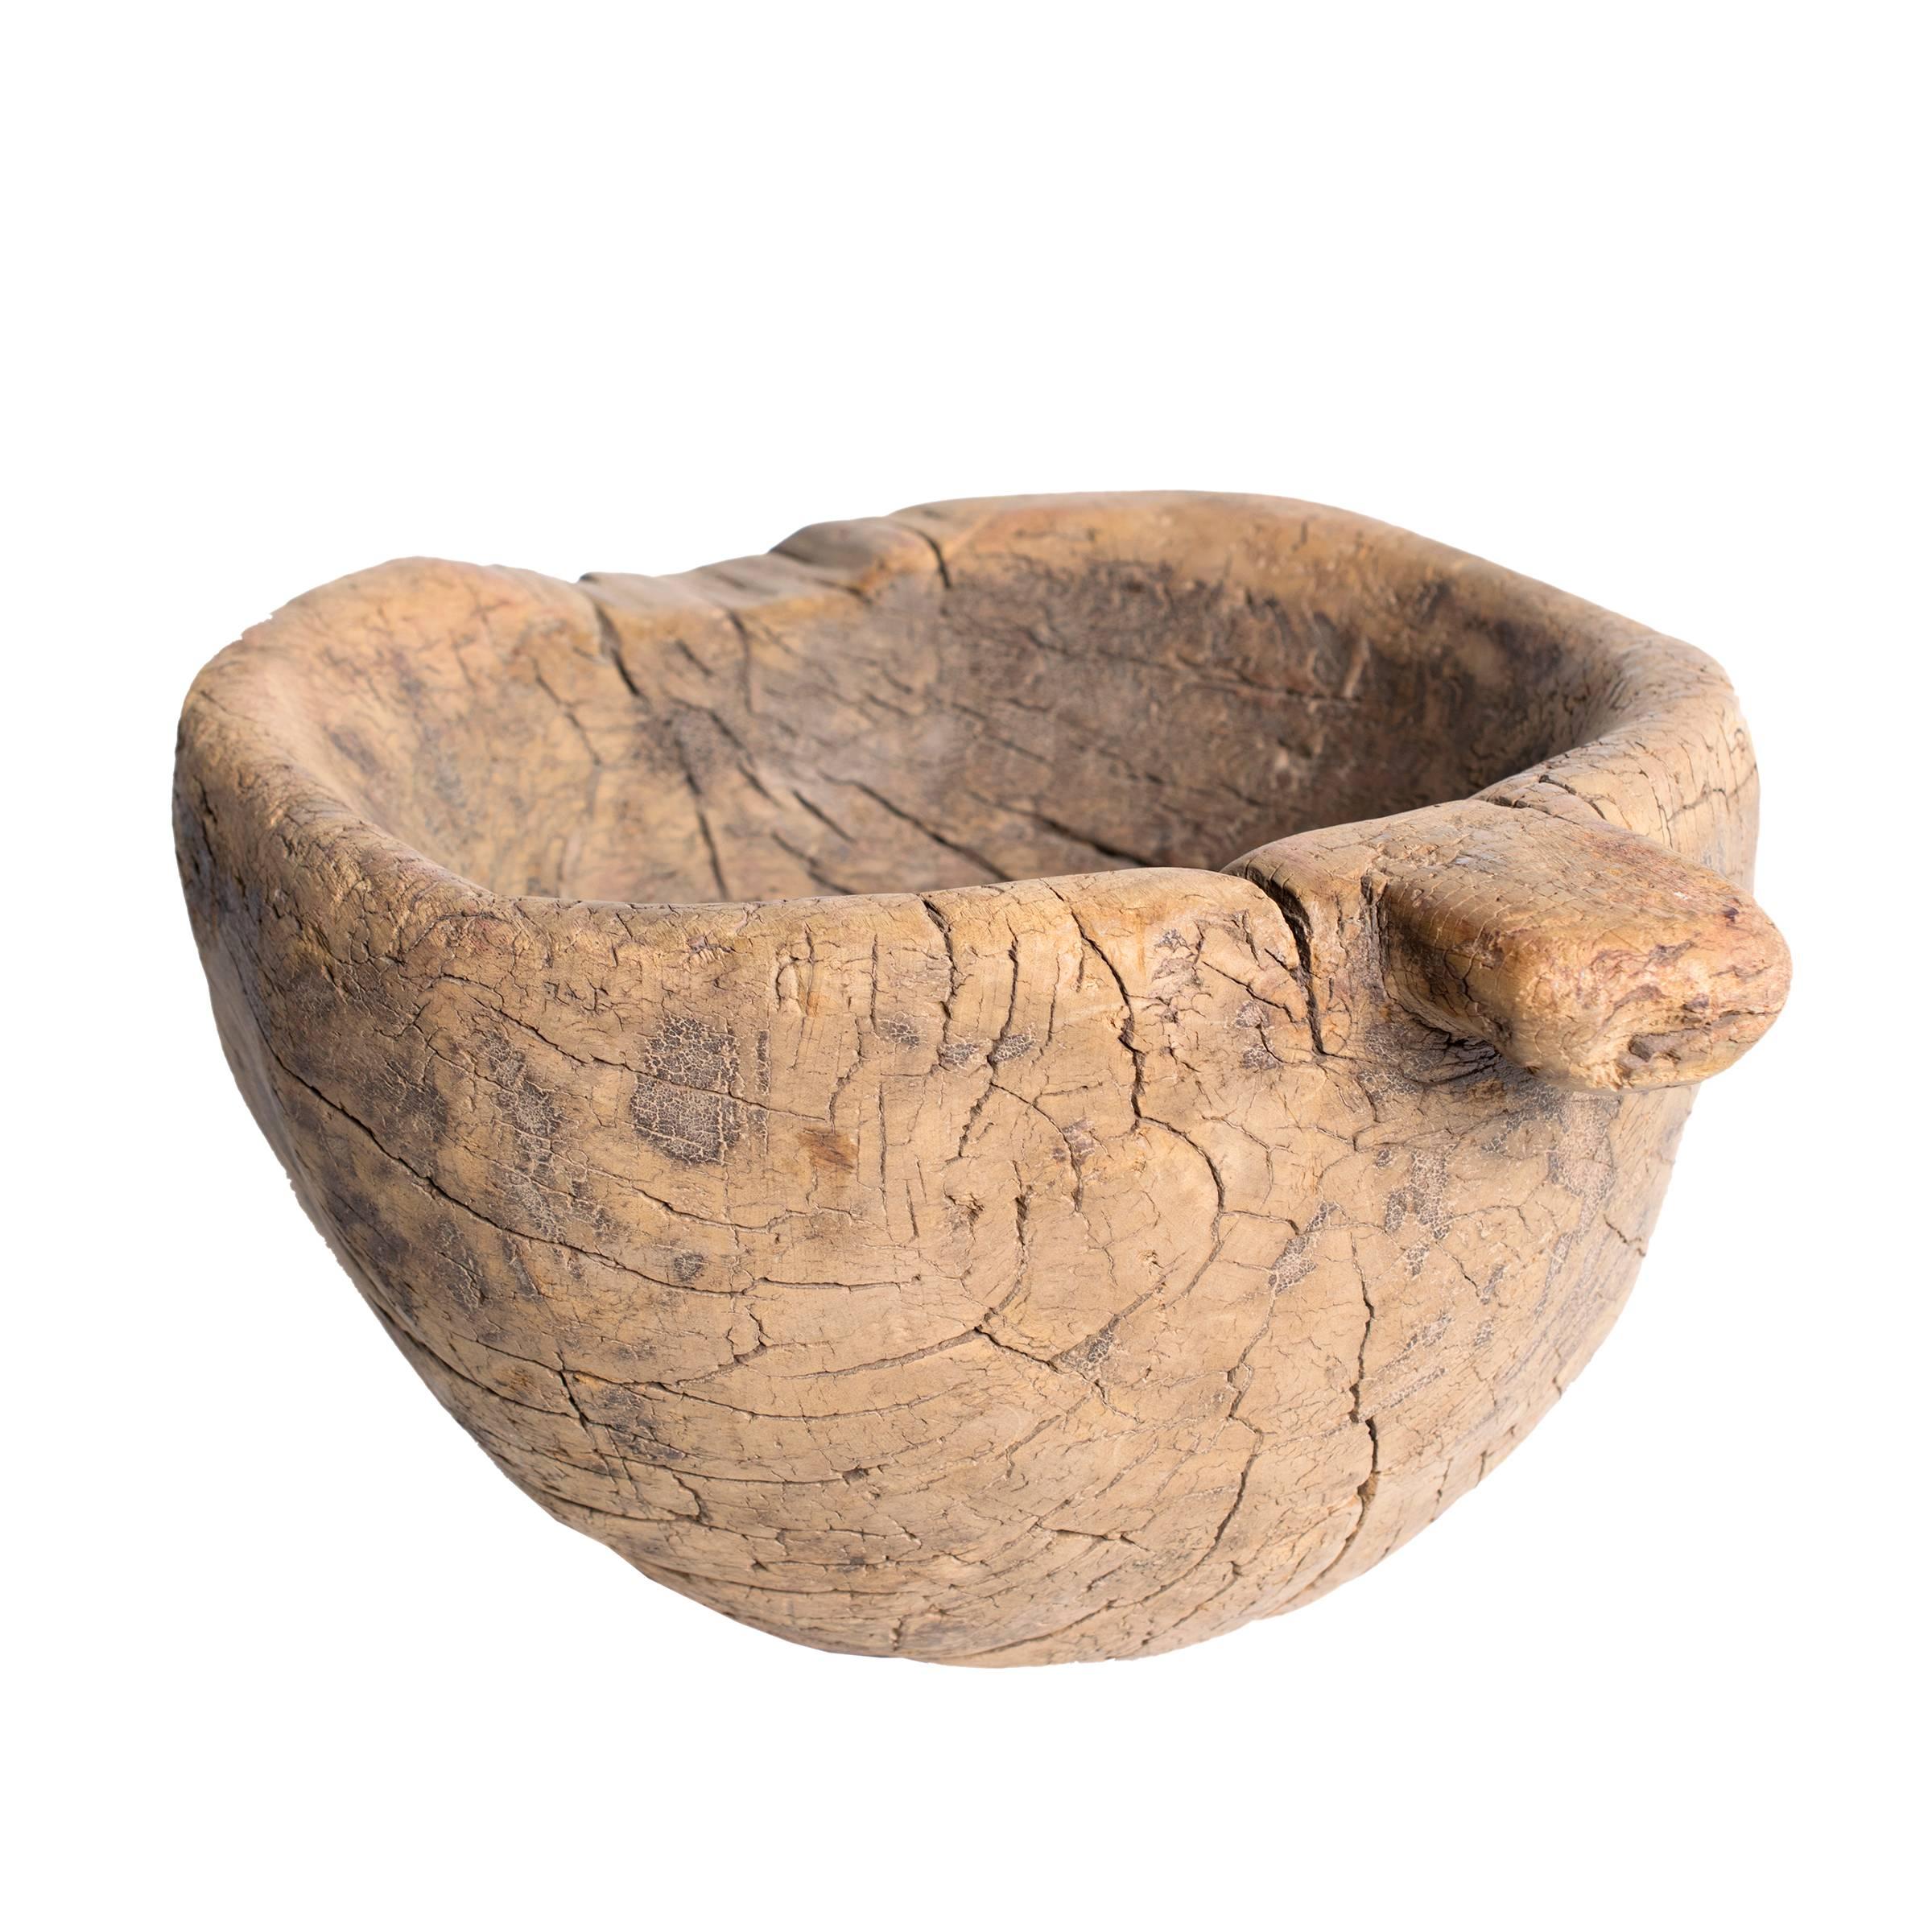 Used to grind the outer husks off rice grains, this humble 19th century mortar hales from northern China, where it had been a kitchen staple in a Provincial home. Carved from elmwood, the mortar’s simple, gourd-like shape transcends pure function to